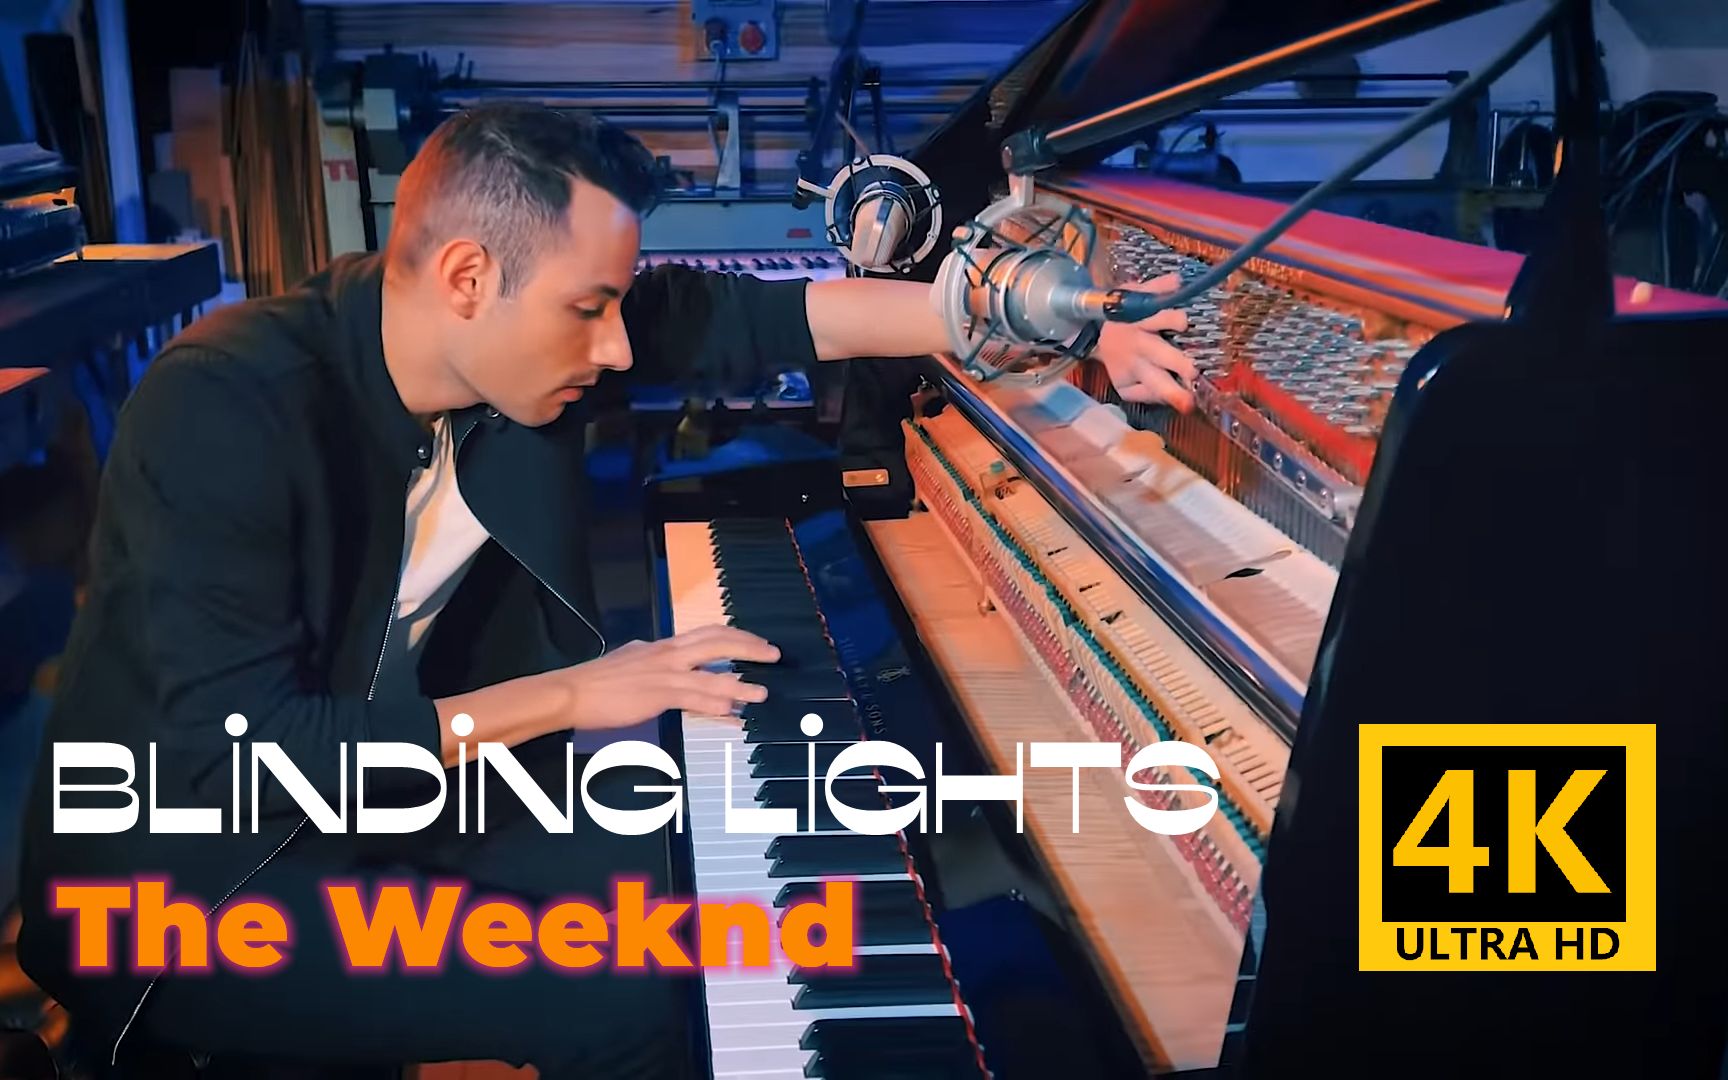 【4K】深度还原盆栽哥 Blinding Lights - The Weeknd x Peter Bence (Piano Cover)